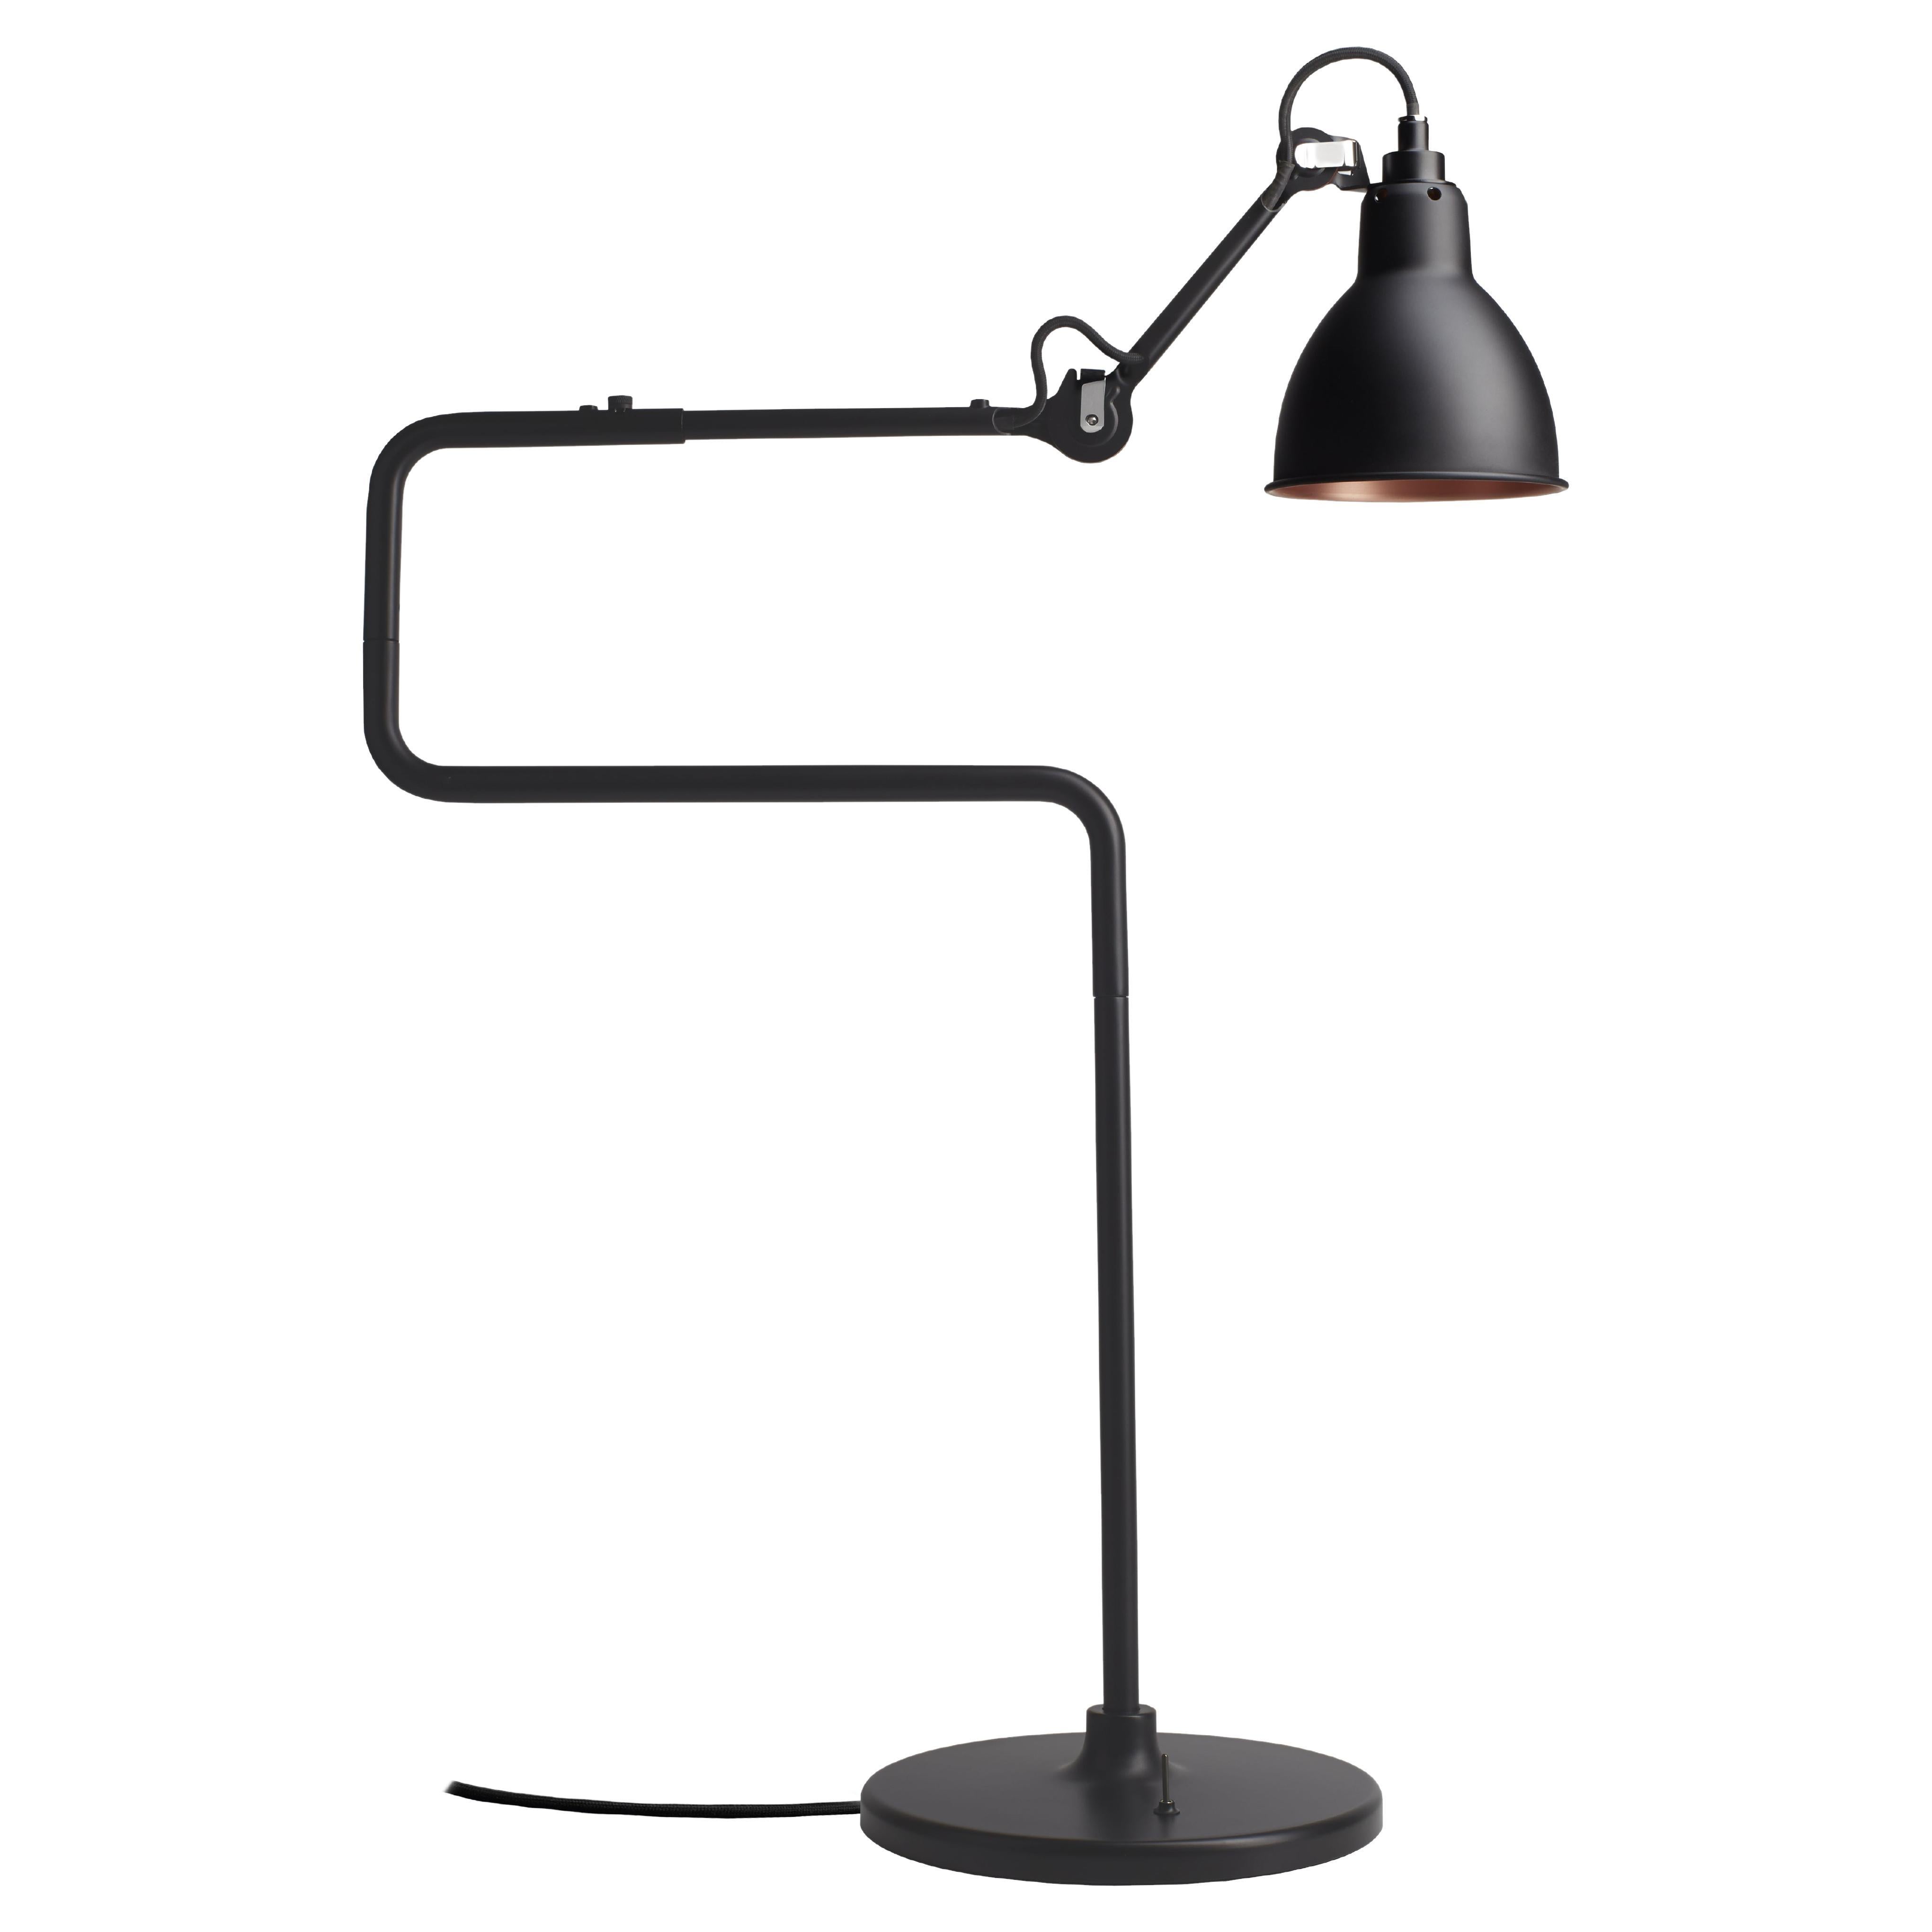 DCW Editions La Lampe Gras N°317 Table Lamp in Black Arm with Black Copper Shade For Sale